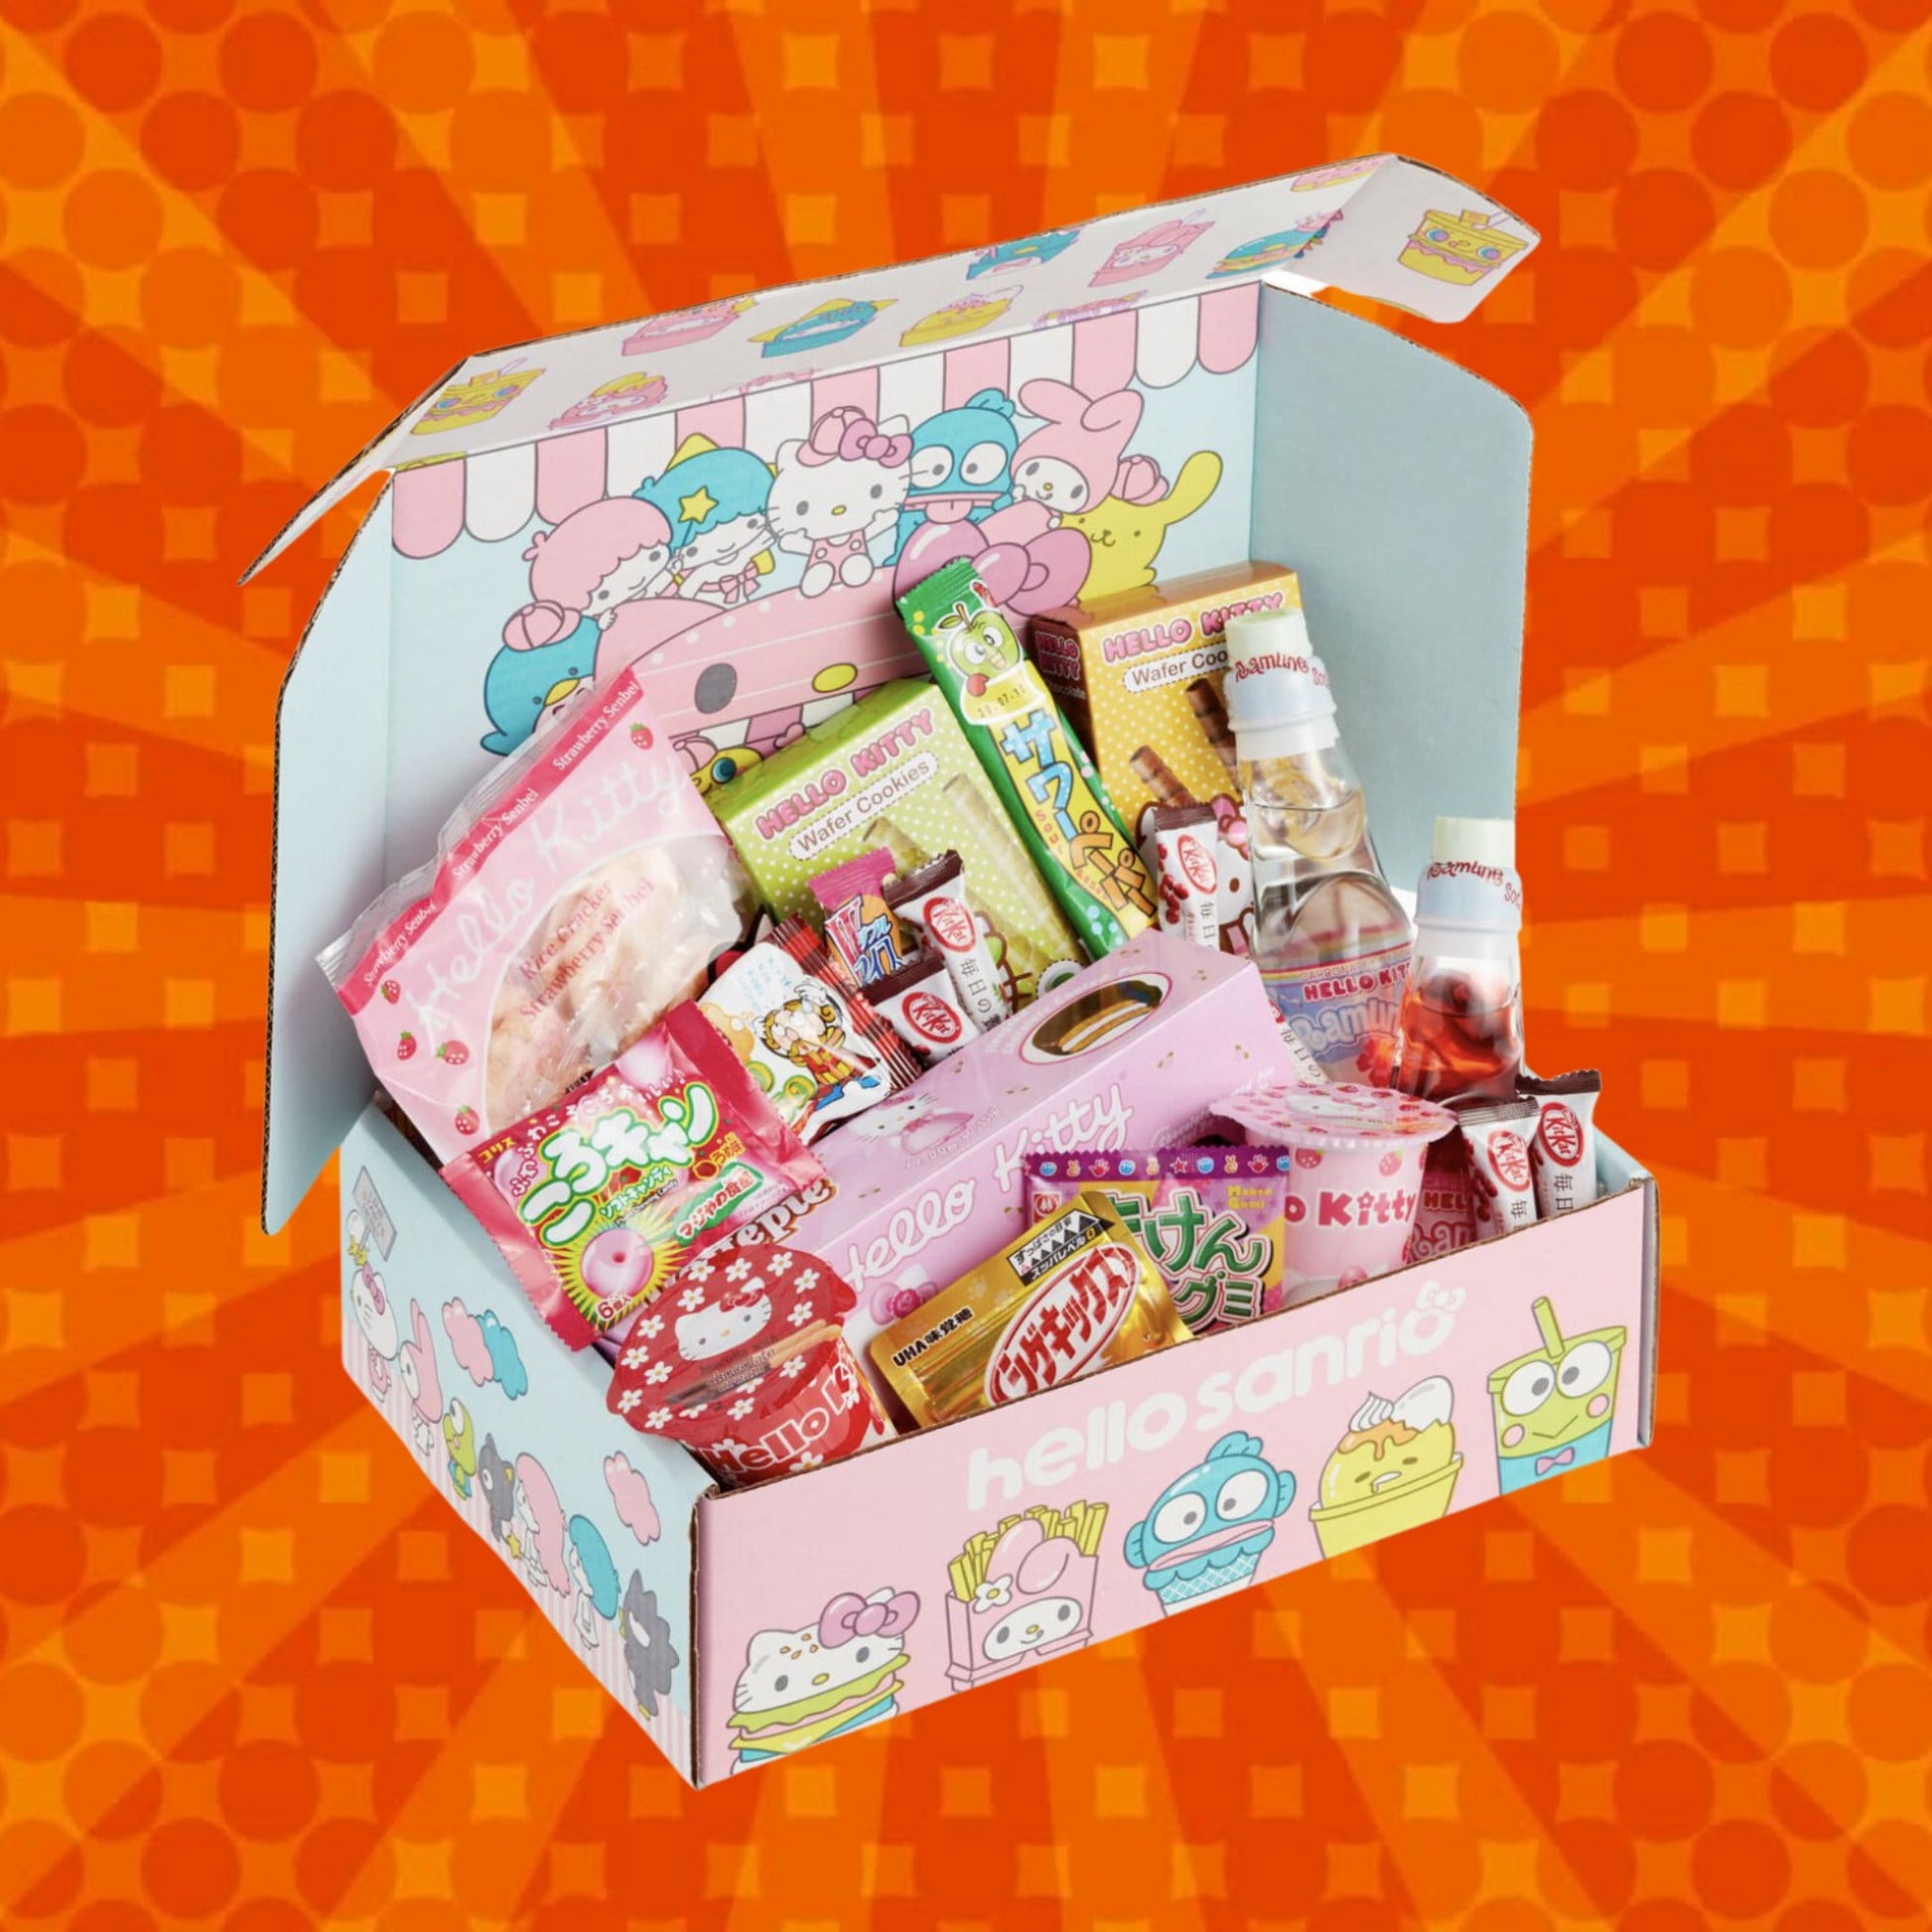 Hello Kitty Mystery Snack Box - Open Box featuring hello-kitty themed snacks, cute anime candy, and other treats.